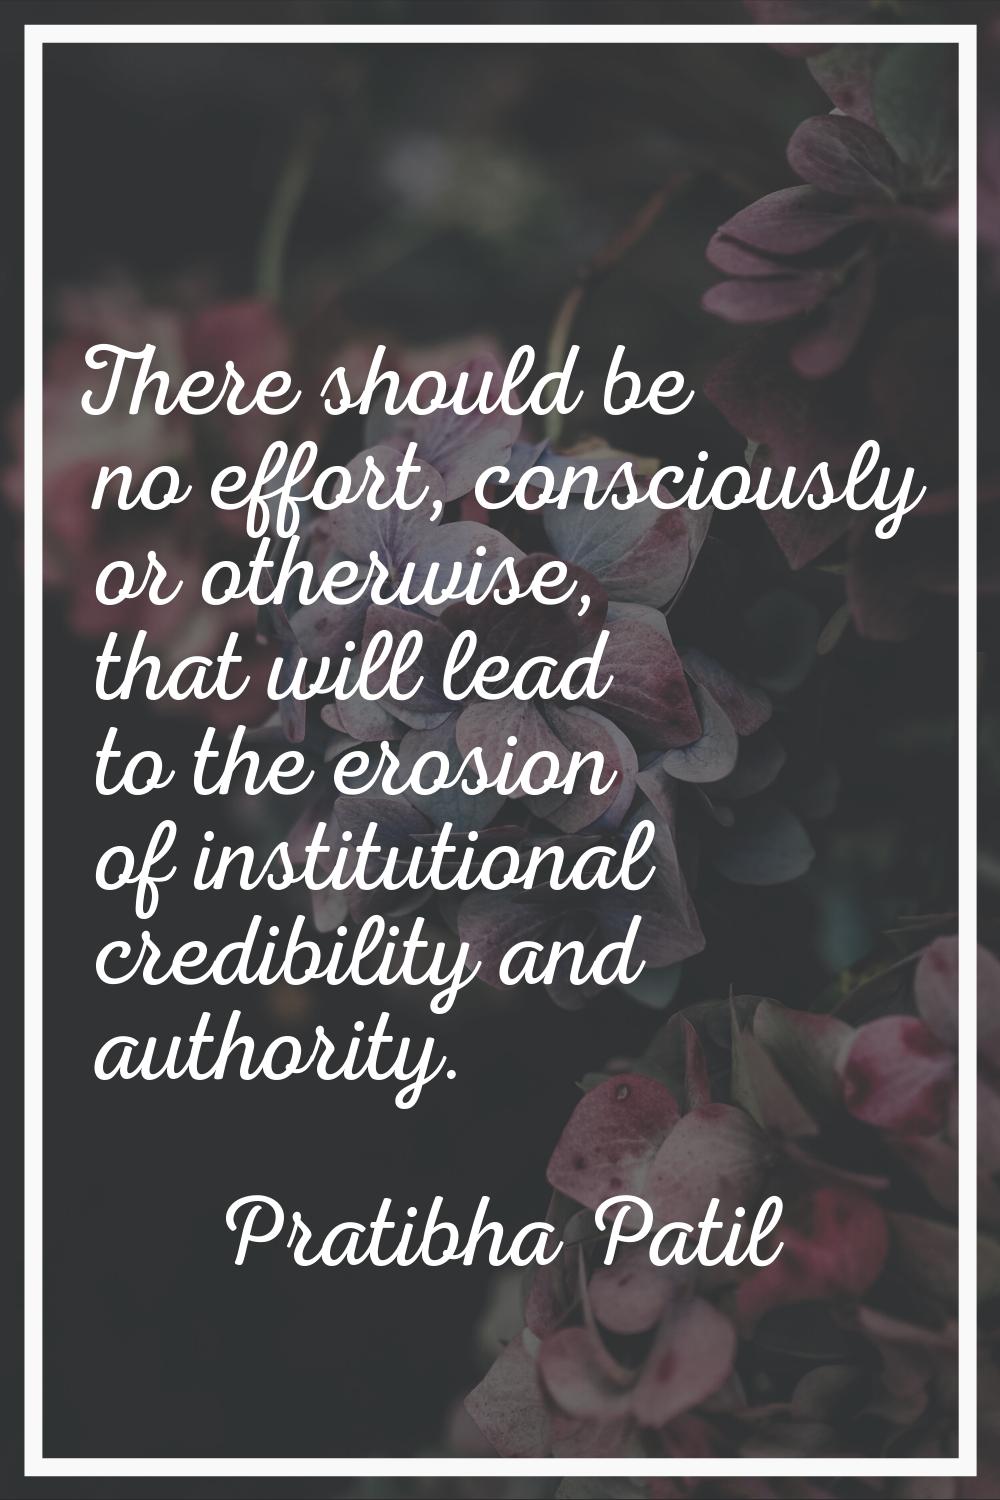 There should be no effort, consciously or otherwise, that will lead to the erosion of institutional